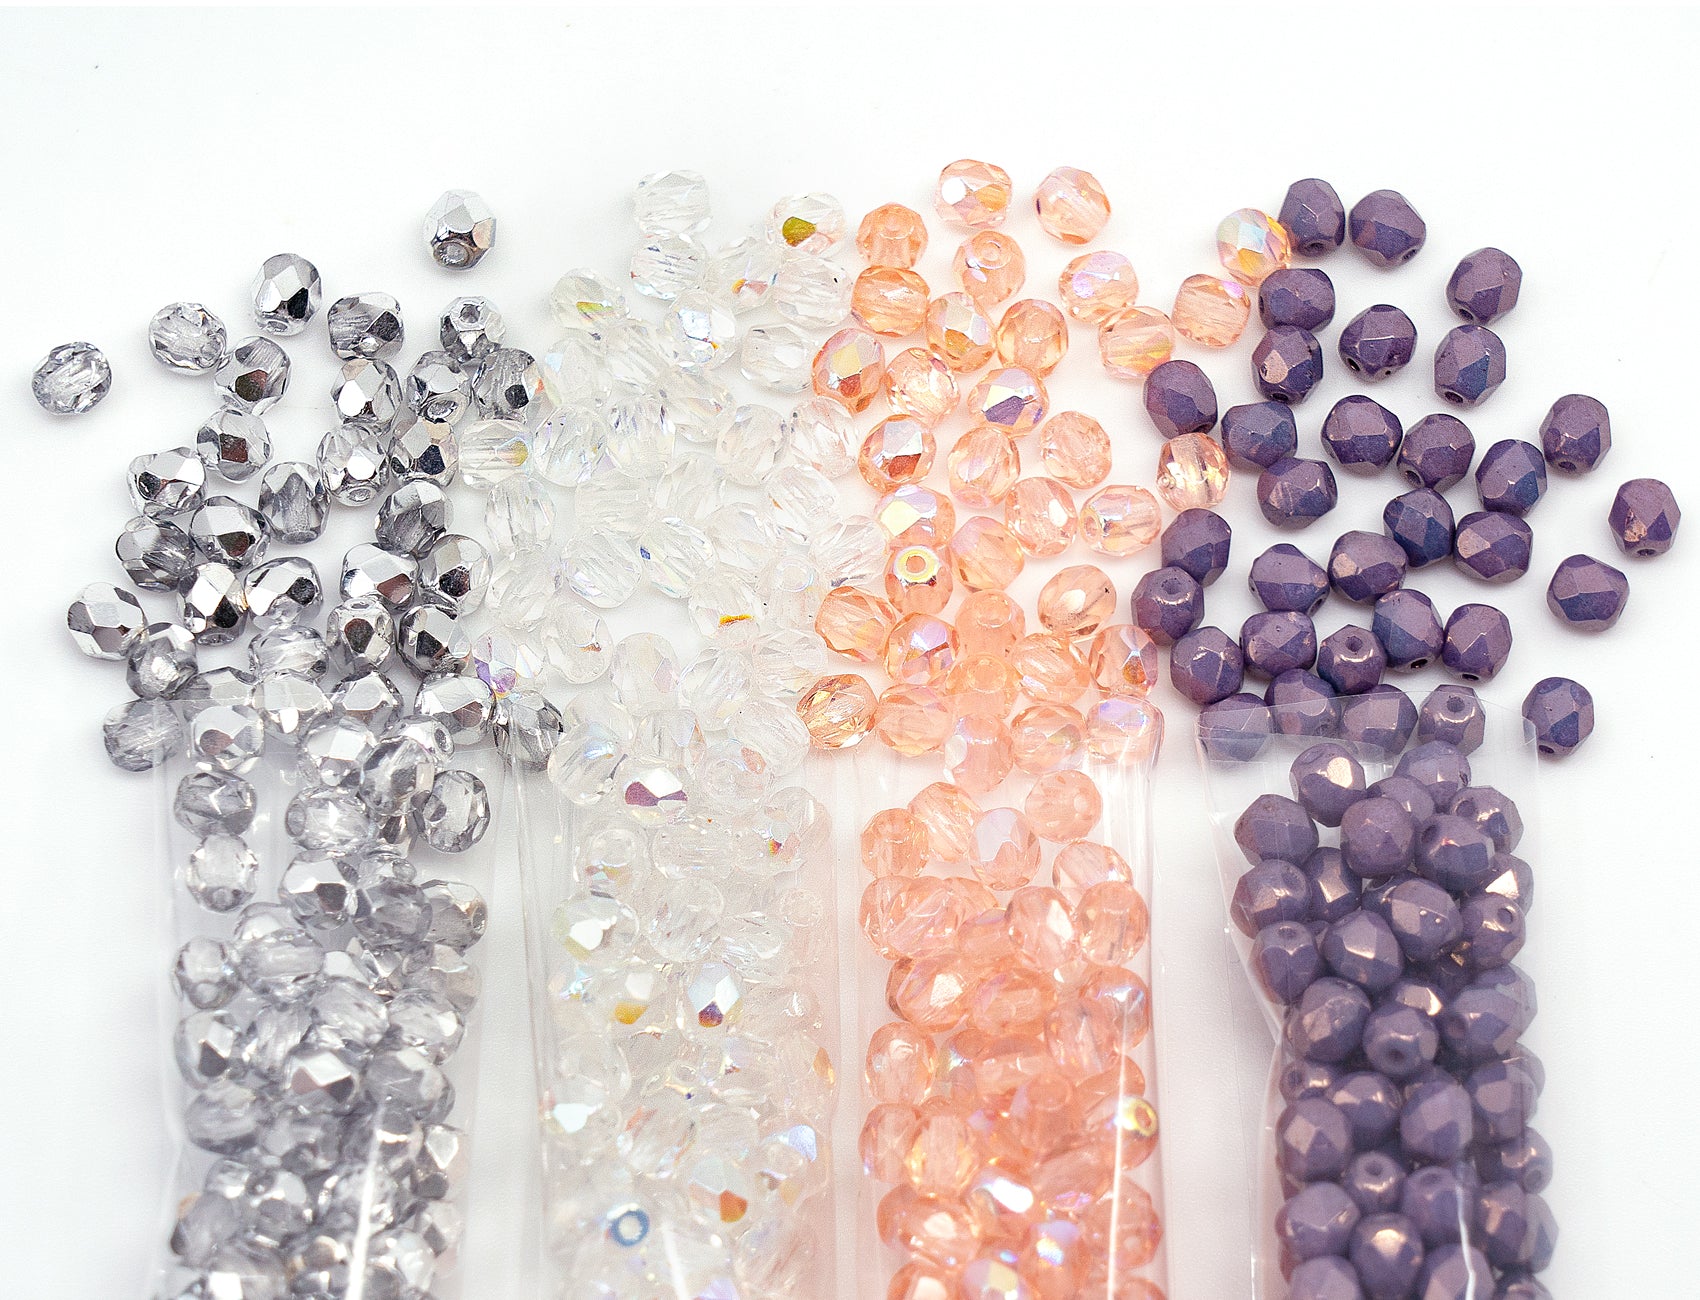 460+ Bead Kit of 4mm Bracelet Beads - Faceted Fire Polished Glass Beads for Jewelry Making Set, 4 Colors: Pink AB, Purple Luster, Crystal AB, Half Silver